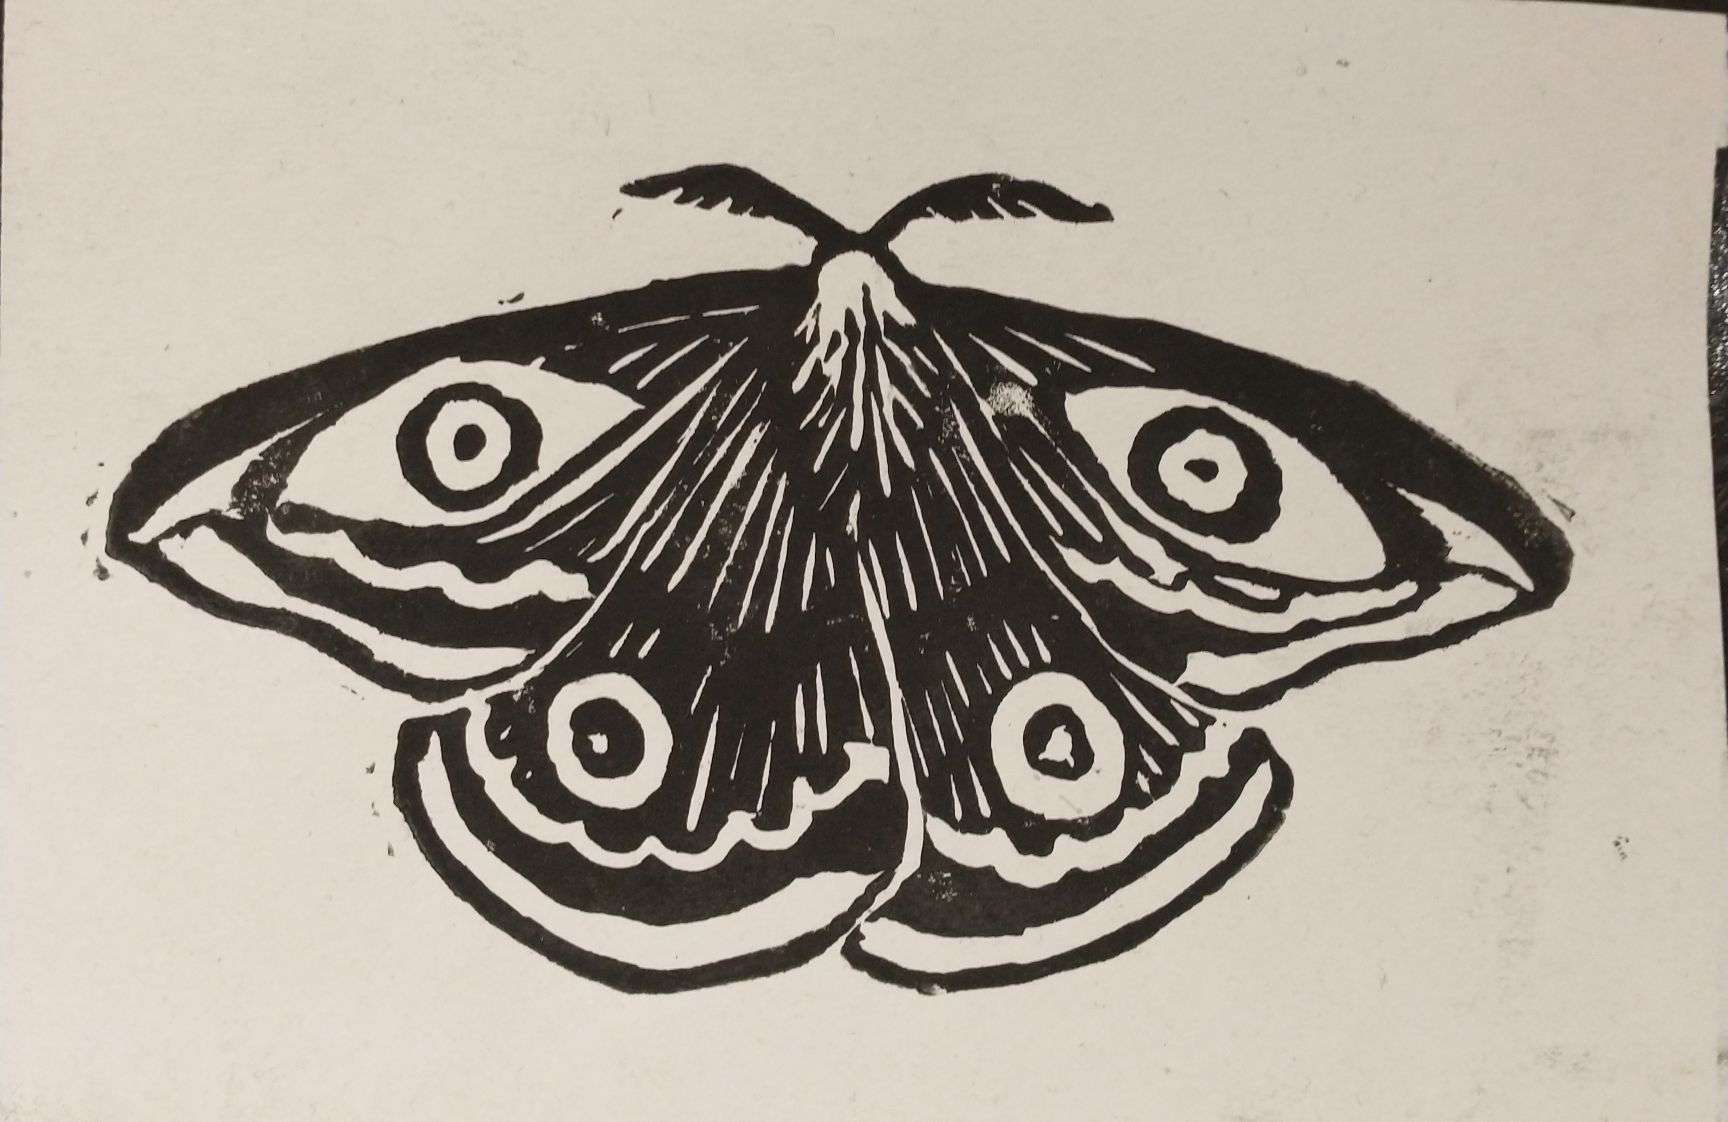 a black and white linocut of an emperor moth.  the moth's prominent eye spots make it look like it is staring at the viewer.